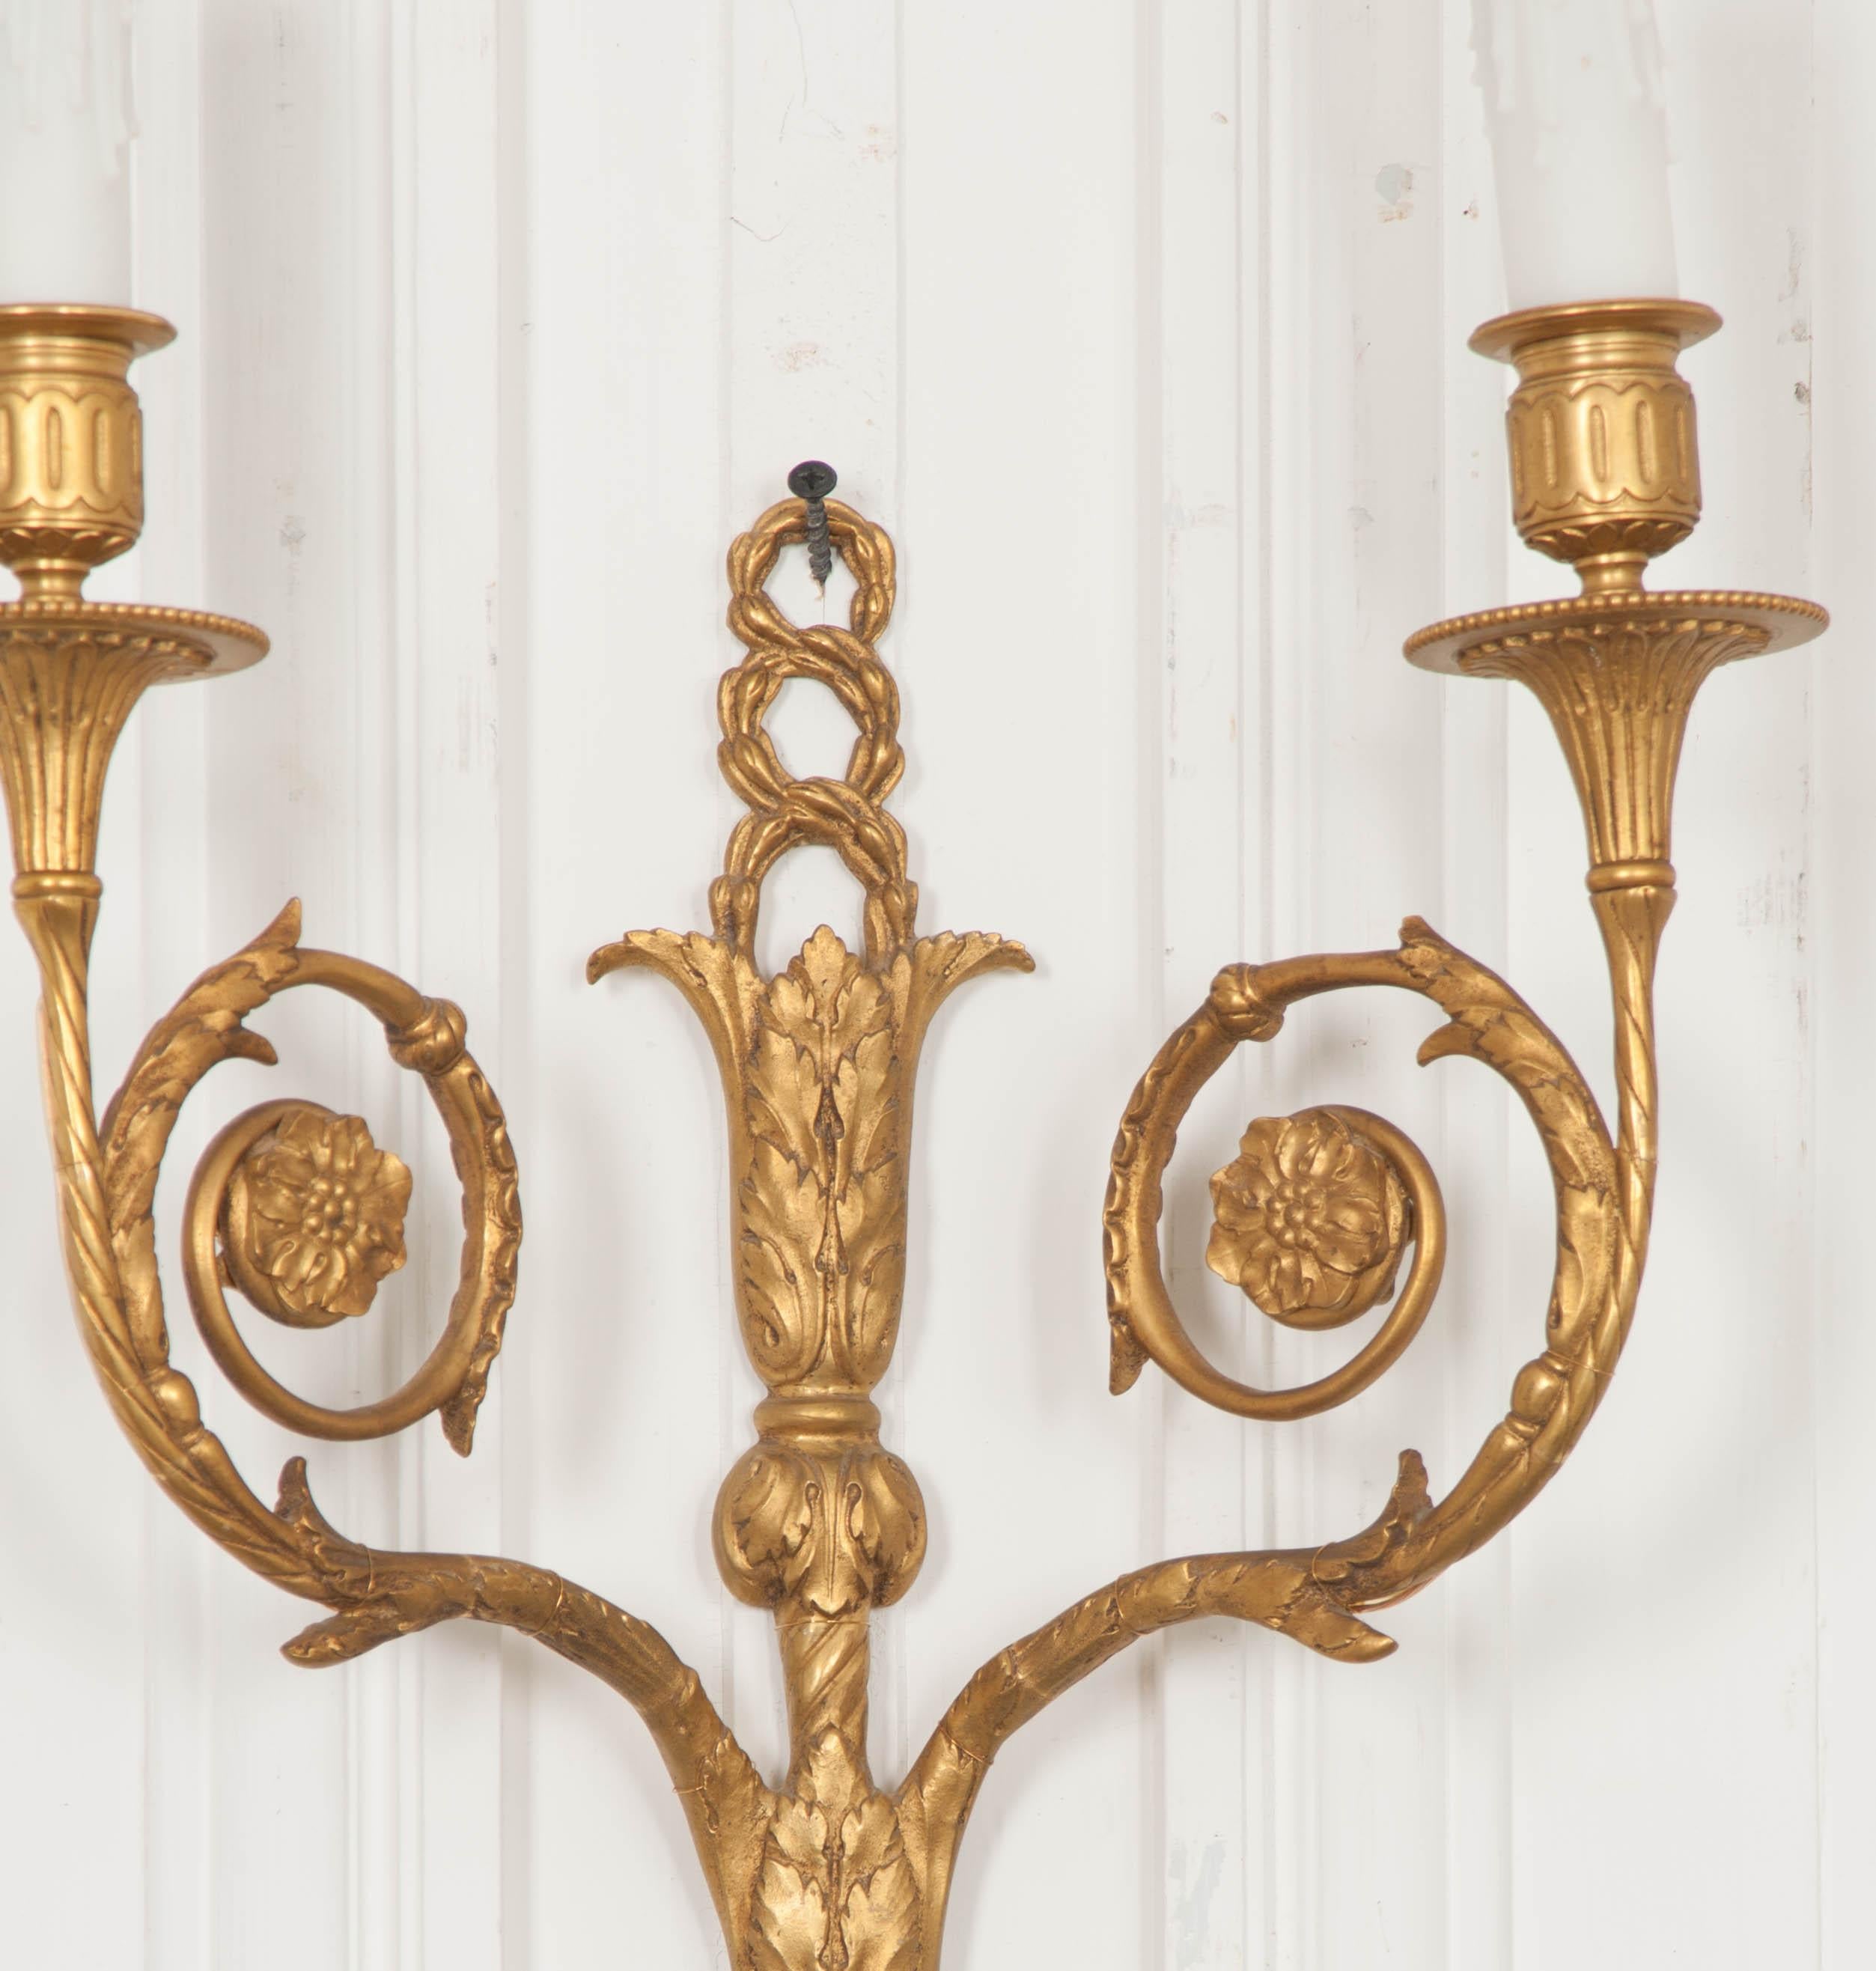 This fine pair of Louis XVI style gilt bronze two-light sconces, circa 1840, are from France and presented in the traditional laurel wreath, acanthus leaf, and rosette decor. Their patina is excellent and they will brighten up any room! Wired for